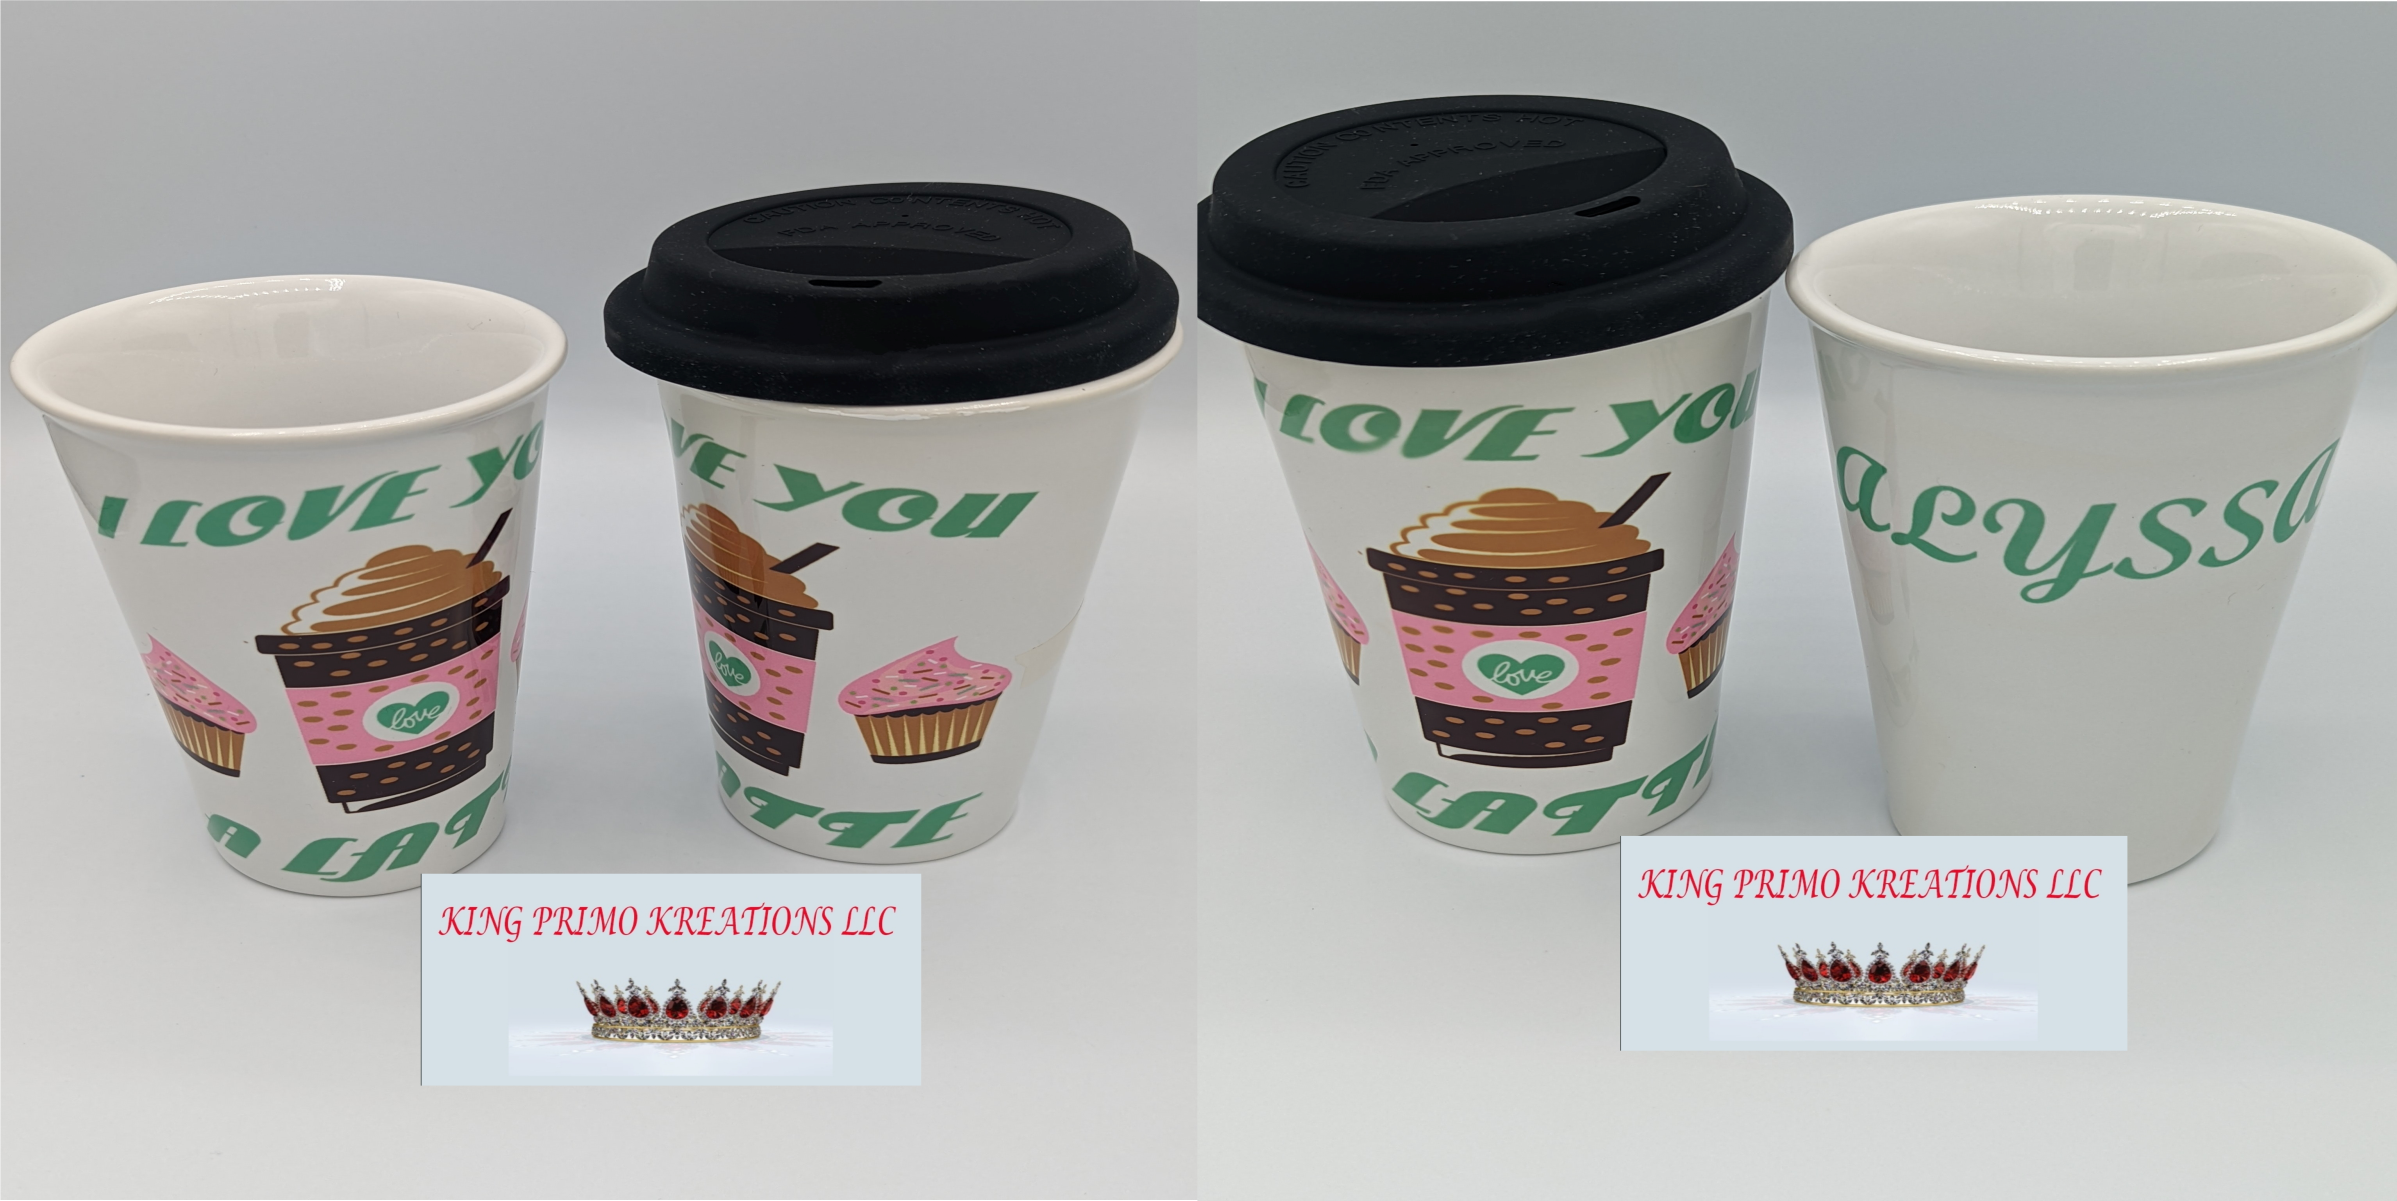 I LOVE YOU A LATTE made with sublimation printing